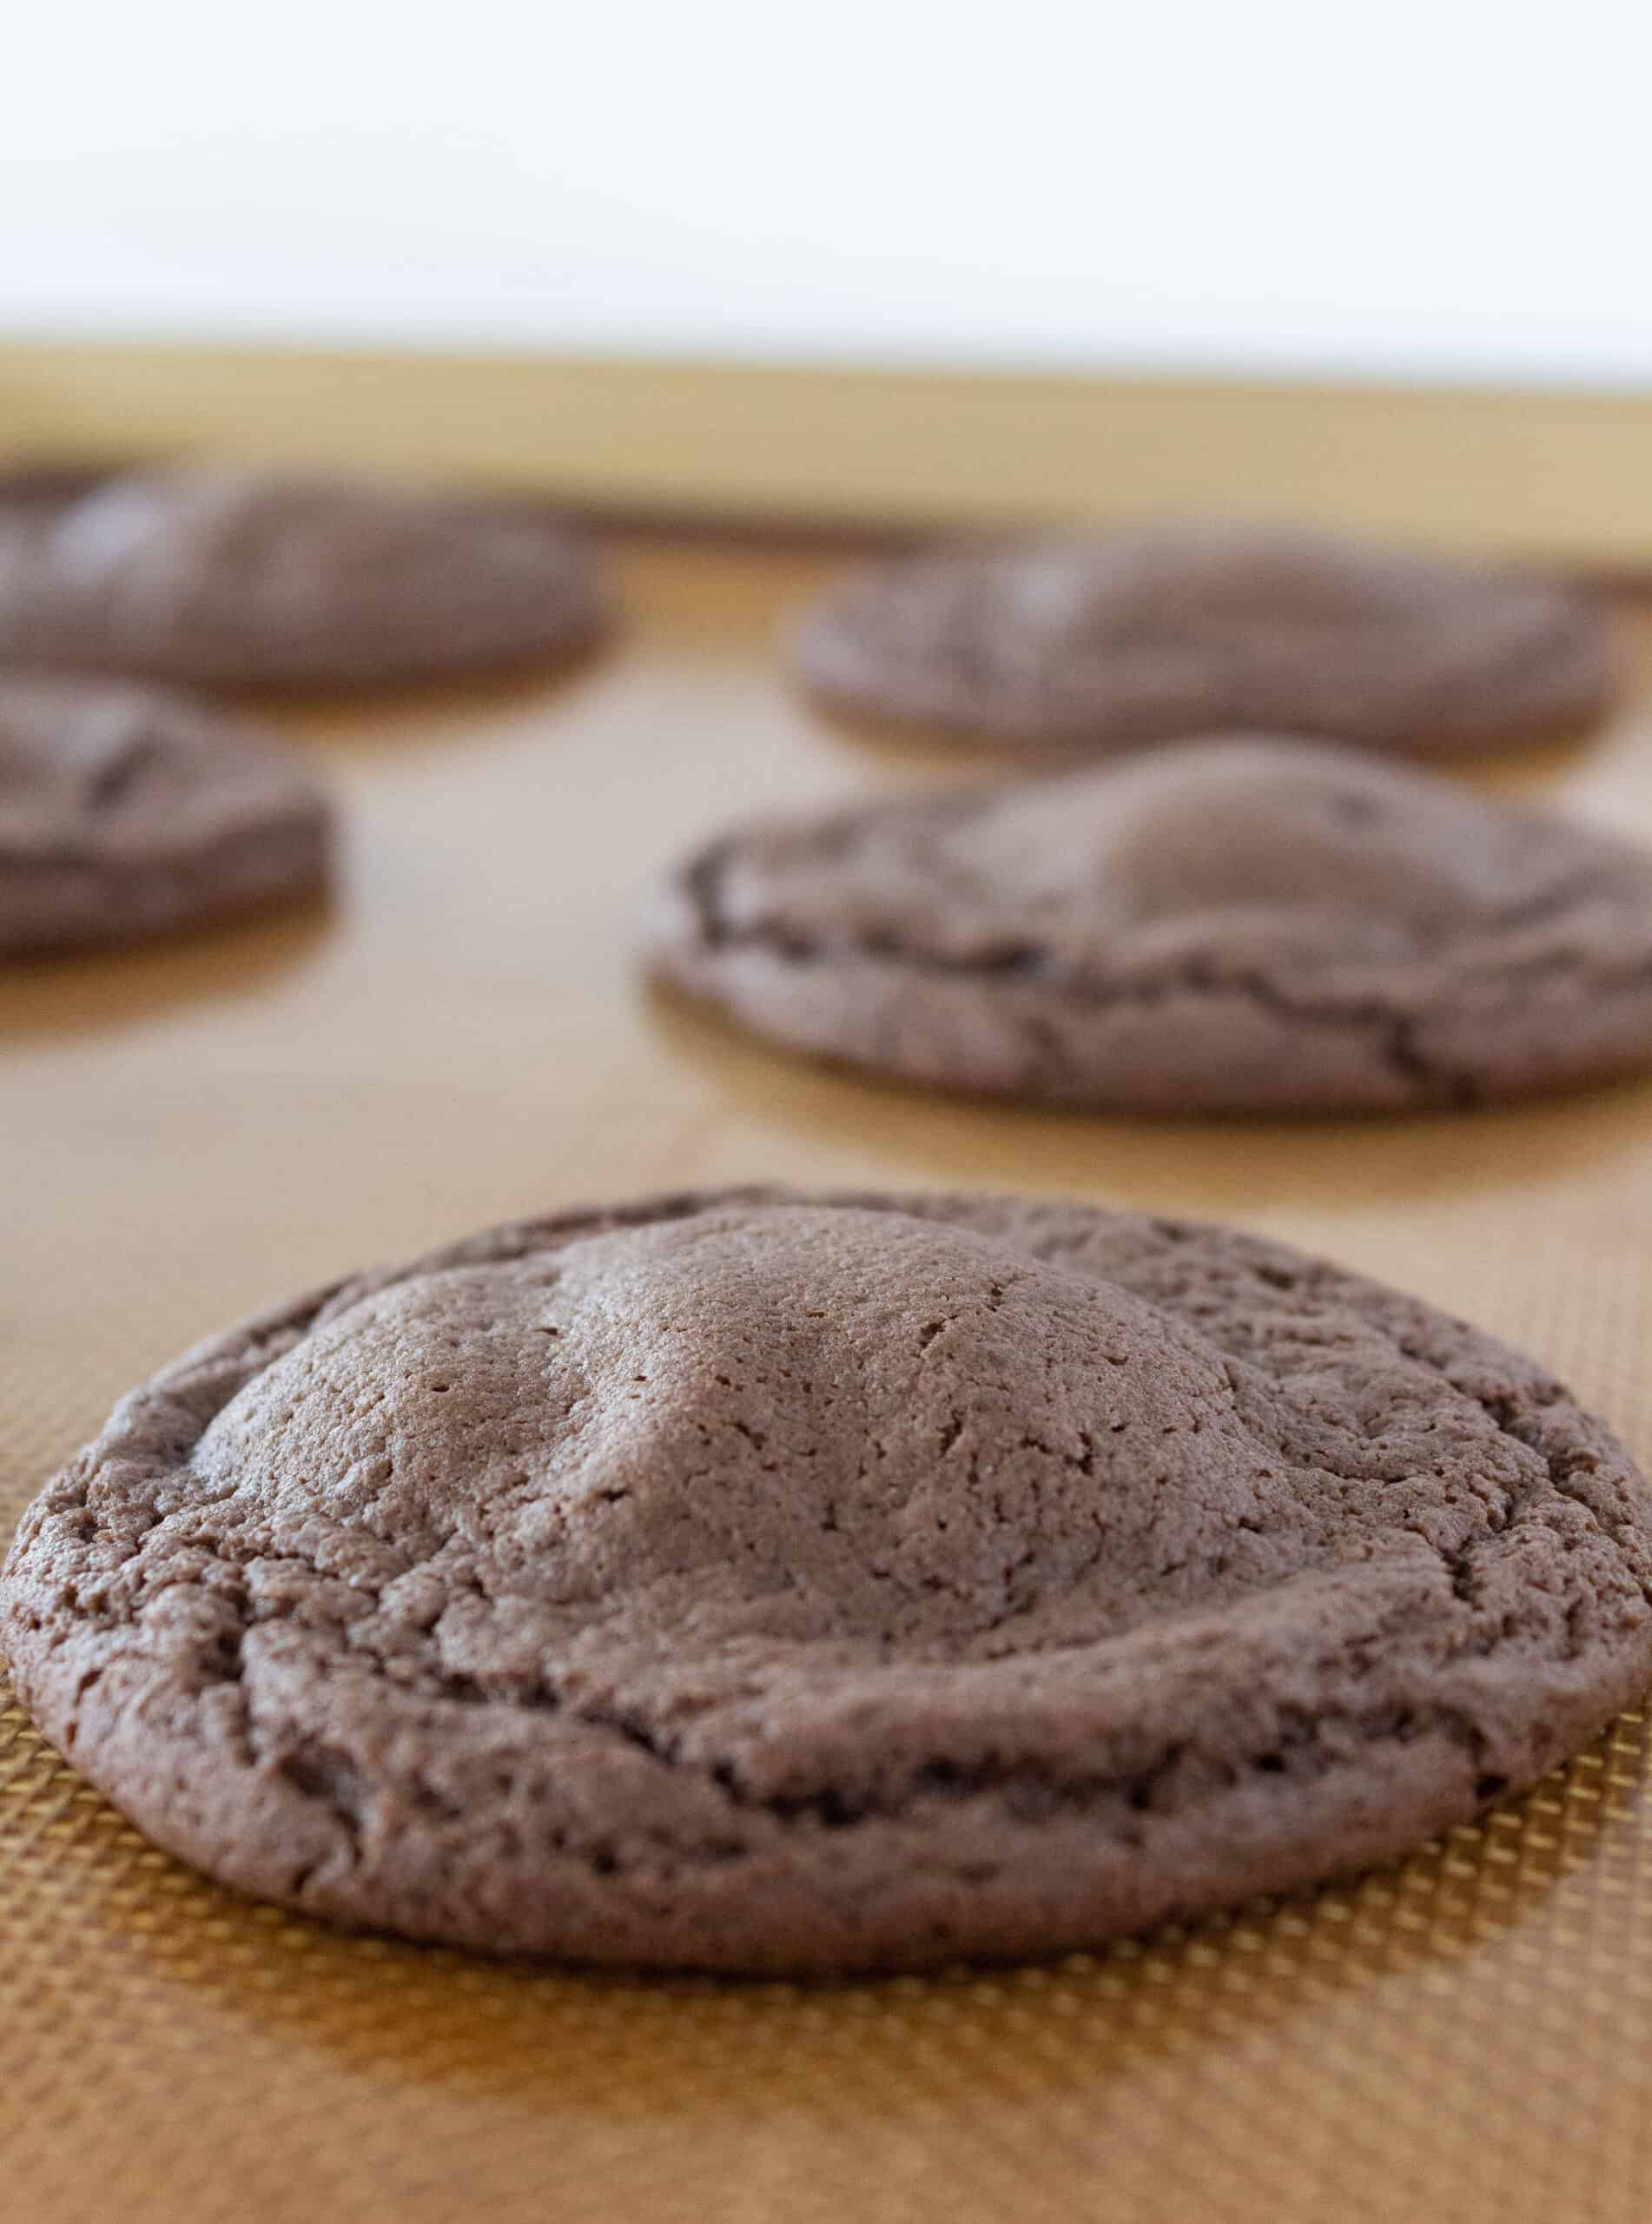 Chocolate Cheesecake Cookies made with a Cake Mix, a recipe featured by top US cookies blogger, Practically Homemade